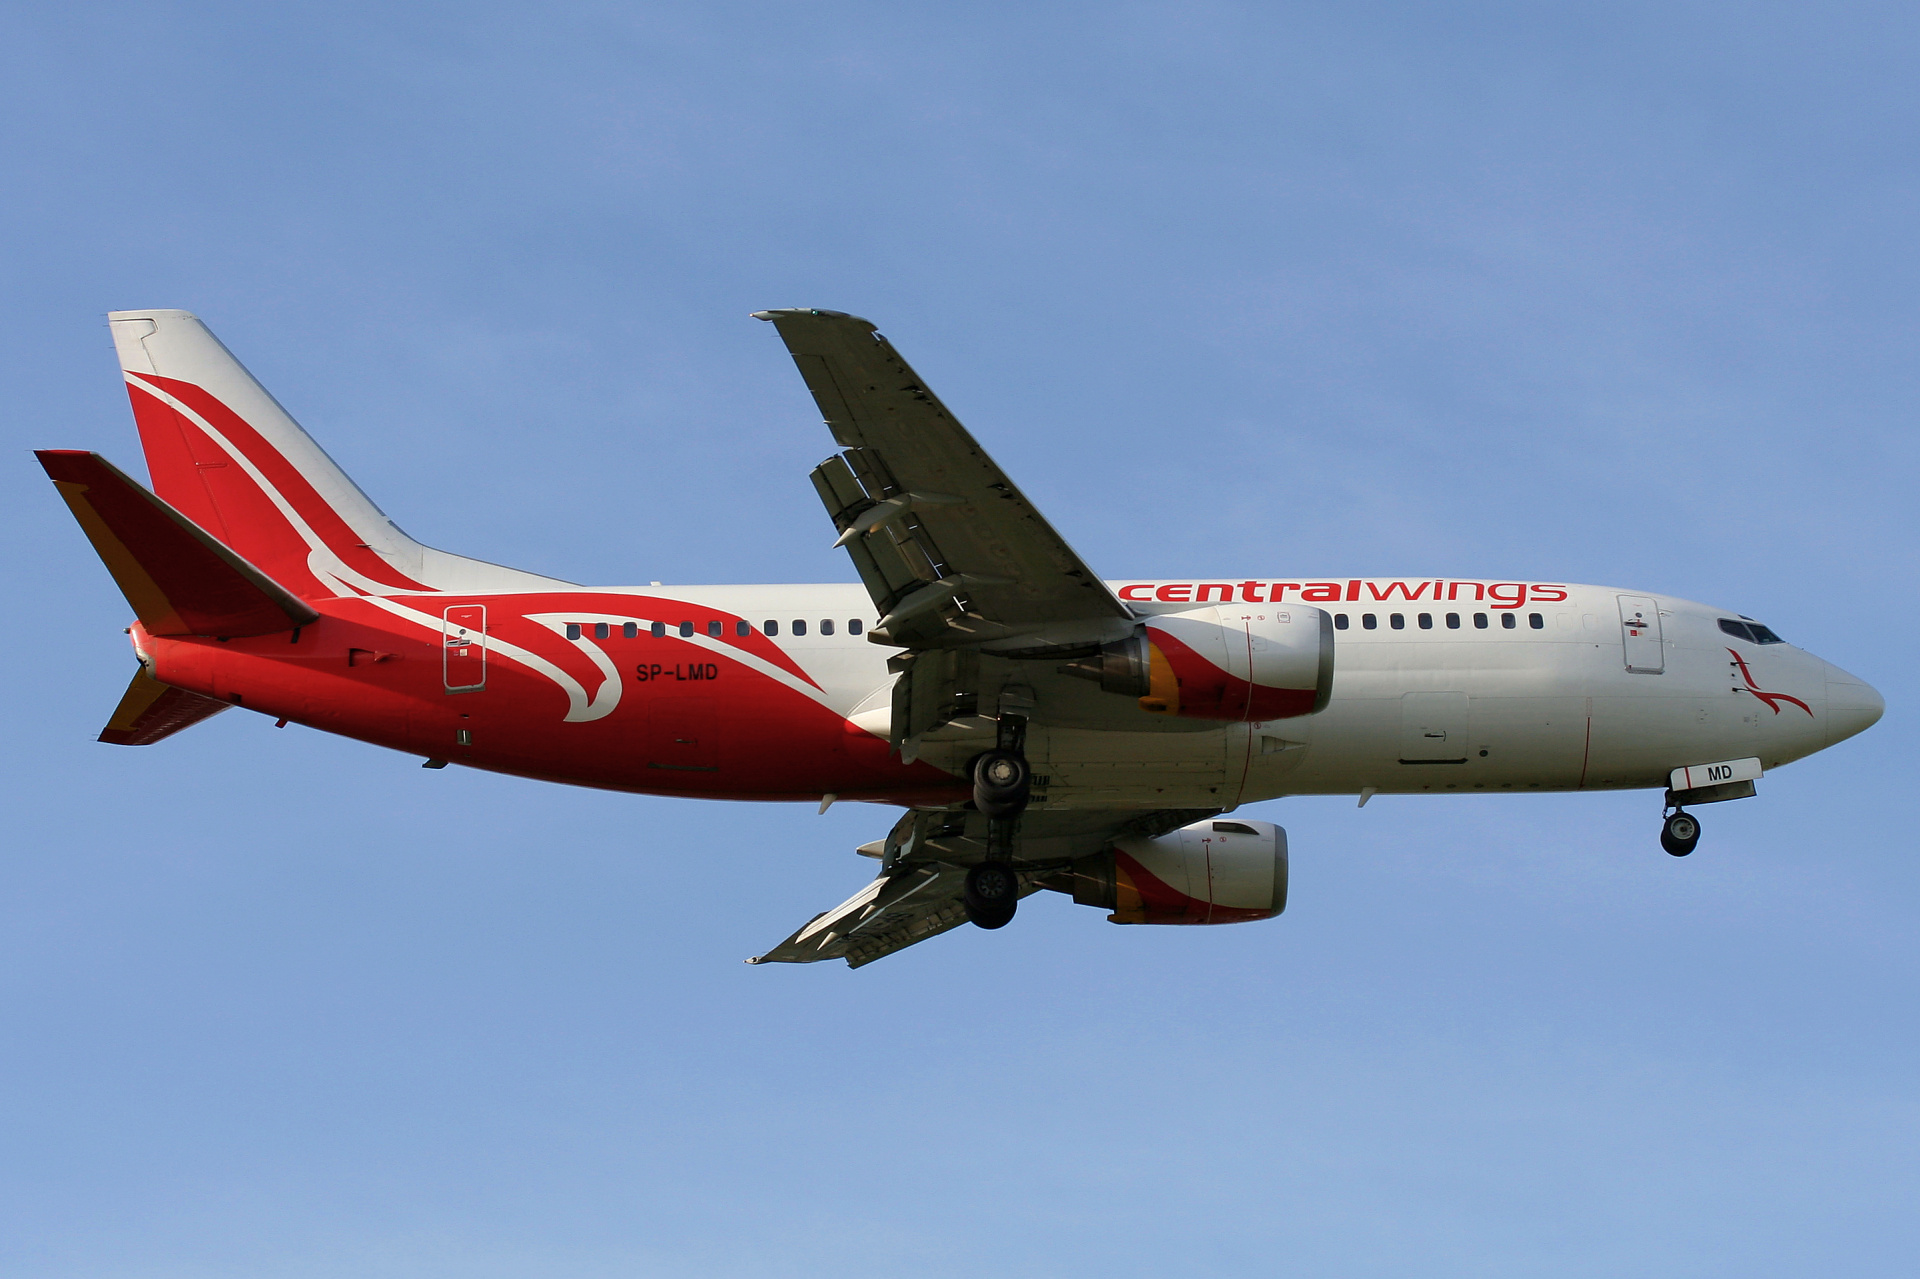 SP-LMD, Centralwings (Aircraft » EPWA Spotting » Boeing 737-300)